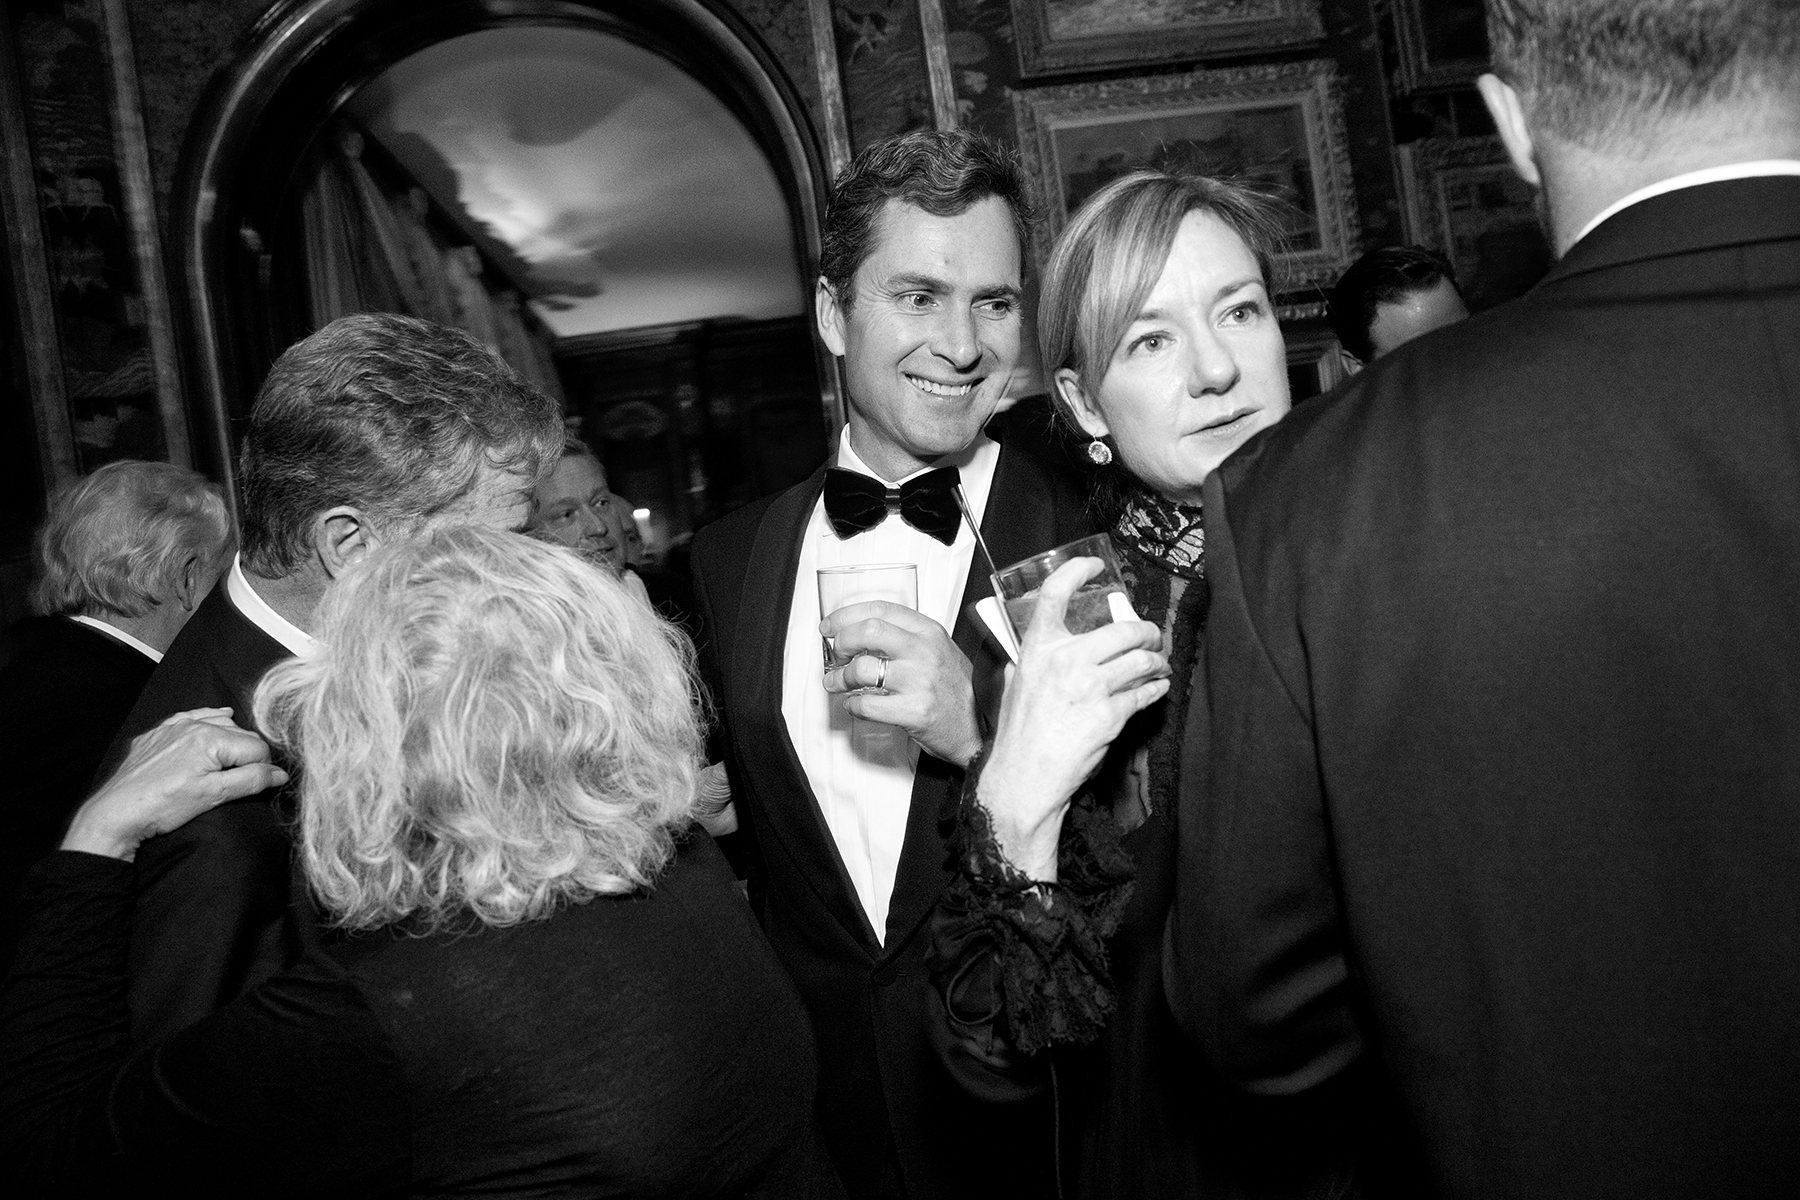 Katie Schwab Paige and her husband Matt Paige make their way through the crowded house of Ann and Gordon Getty during a huge party to celebrate Gordon Getty’s 80th birthday in San Francisco, Calif., on Saturday, December 14, 2013.This photograph is of a candid moment and was not directed in any way.